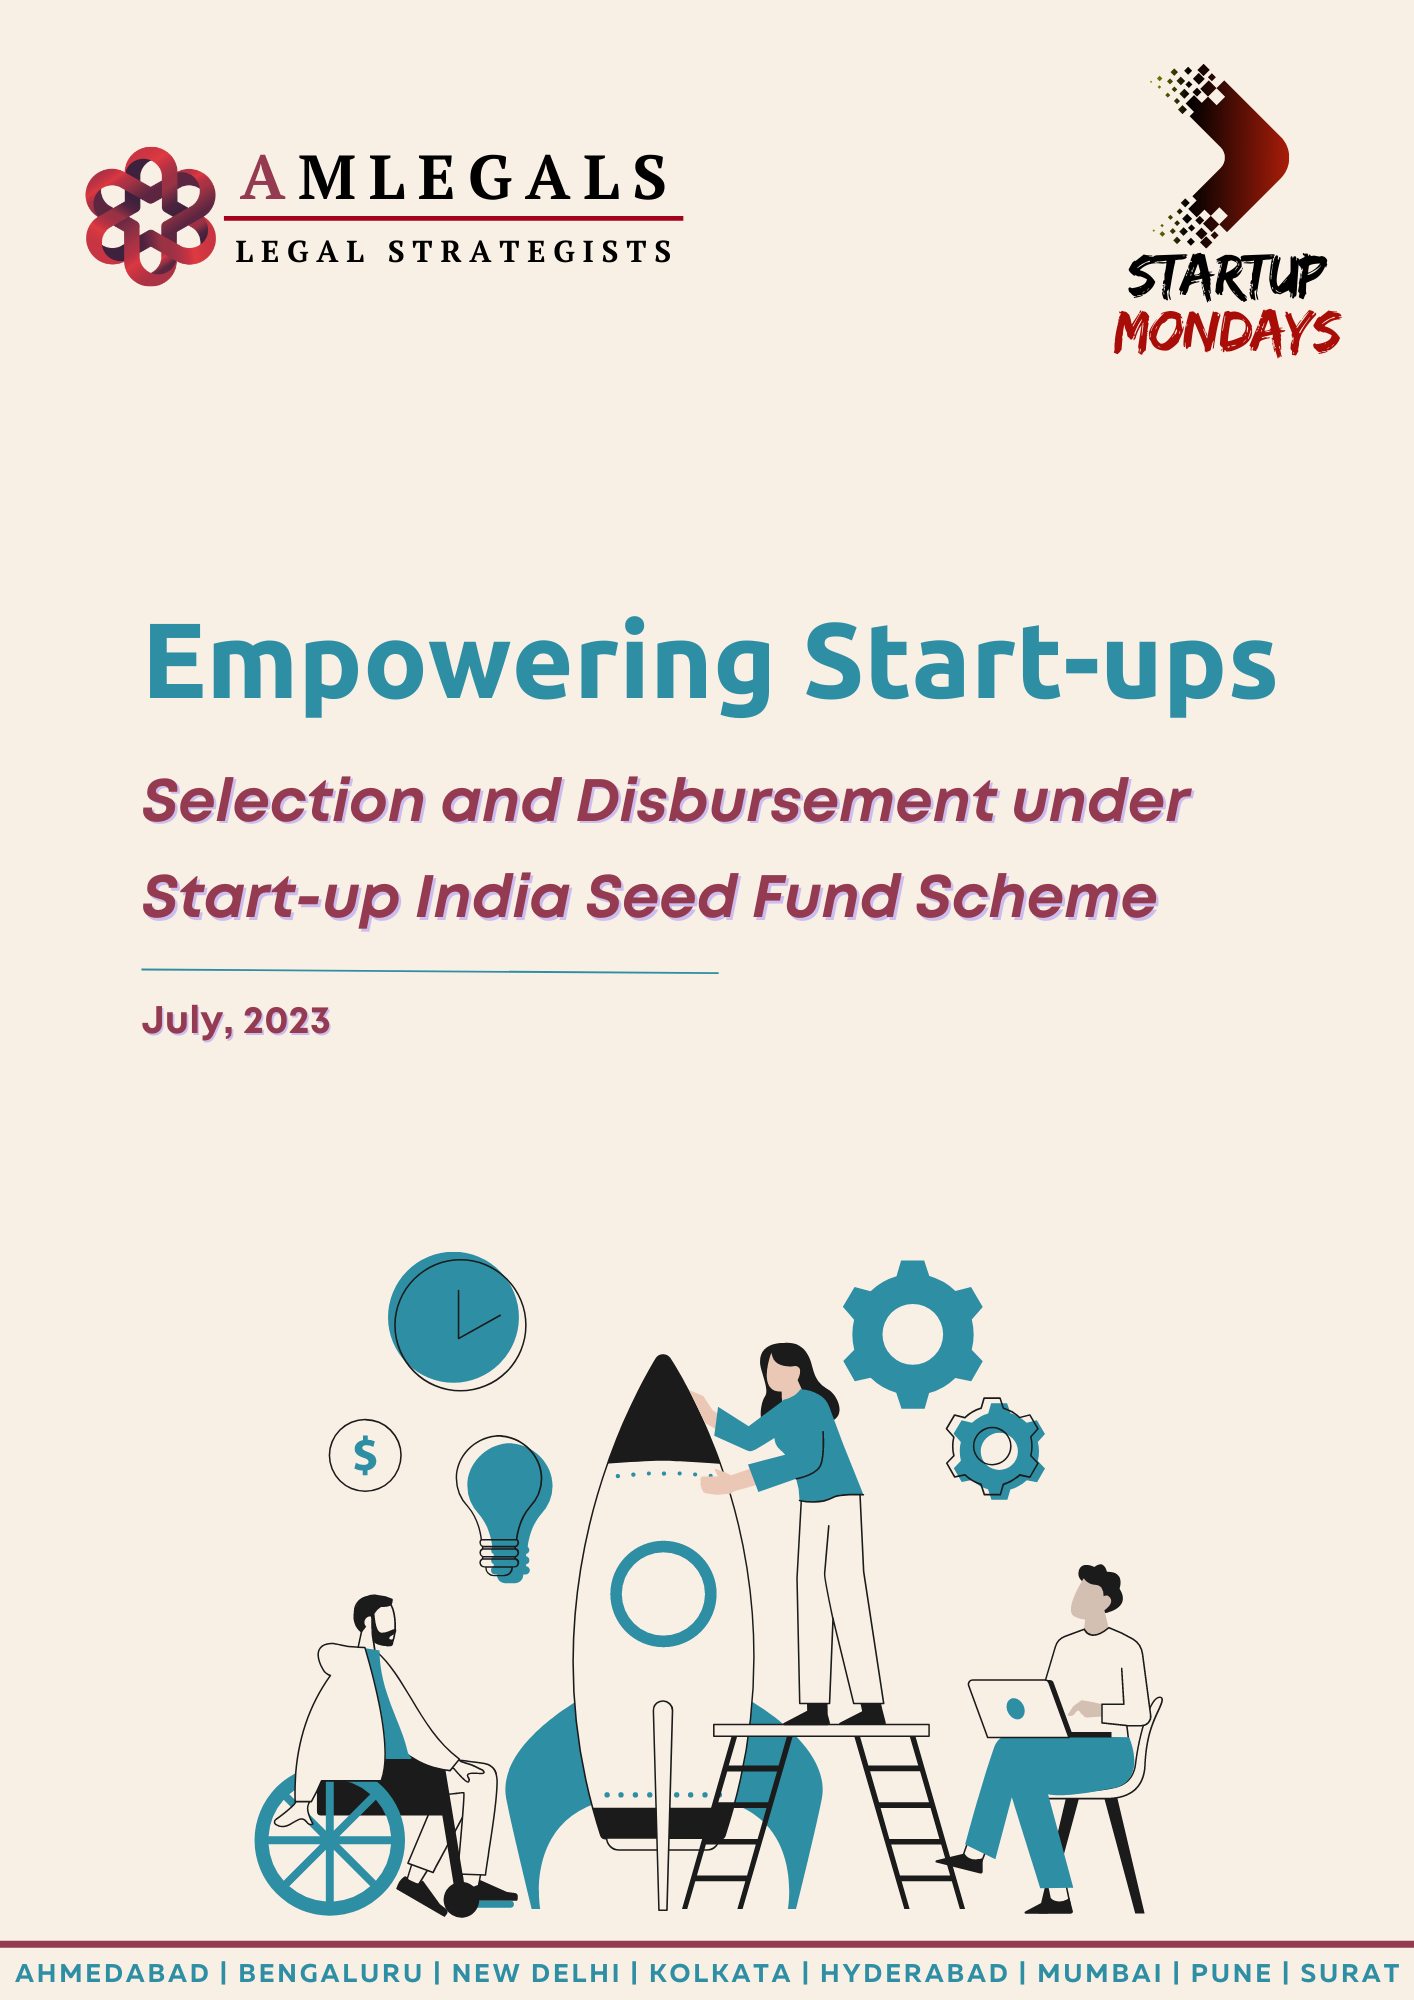 Selection and Disbursement under Start-up India Seed Fund Scheme